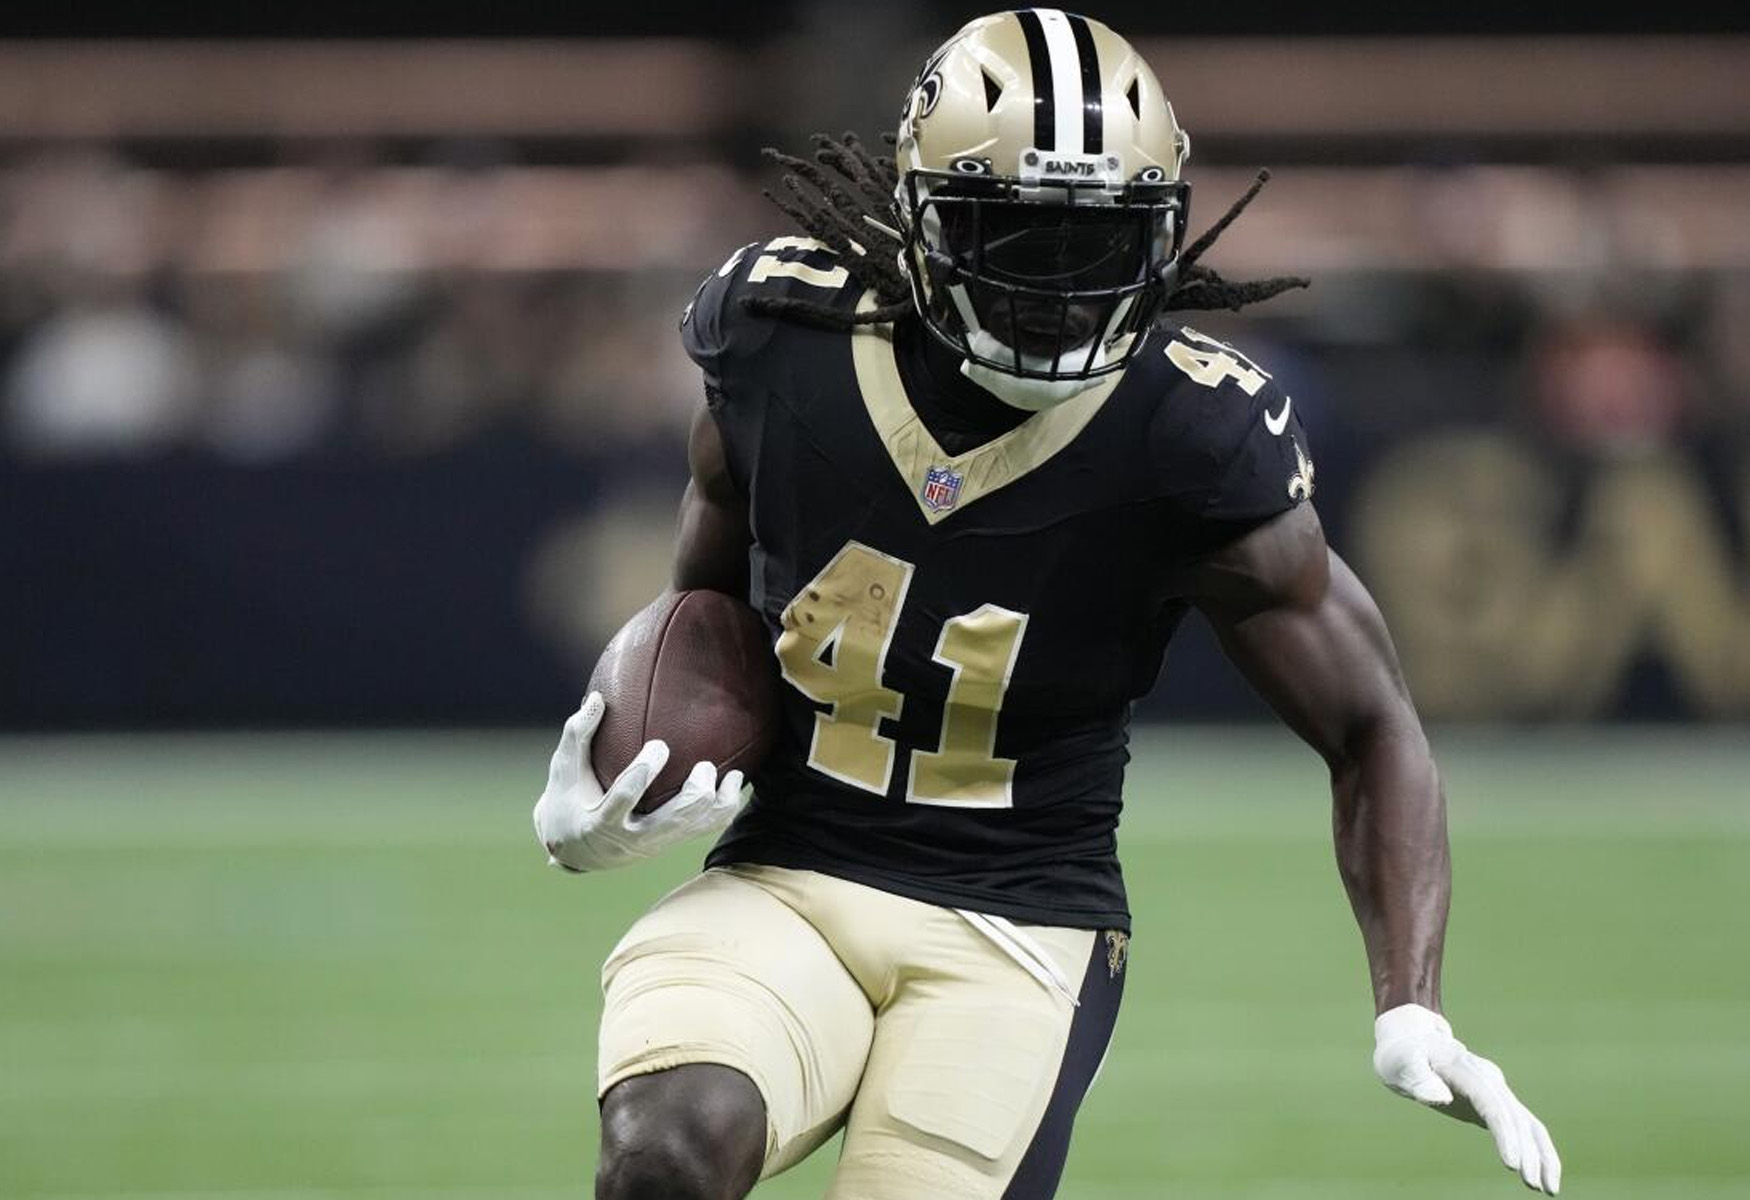 Alvin Kamara Collides With NFL Official, Causing Gruesome Leg Injury